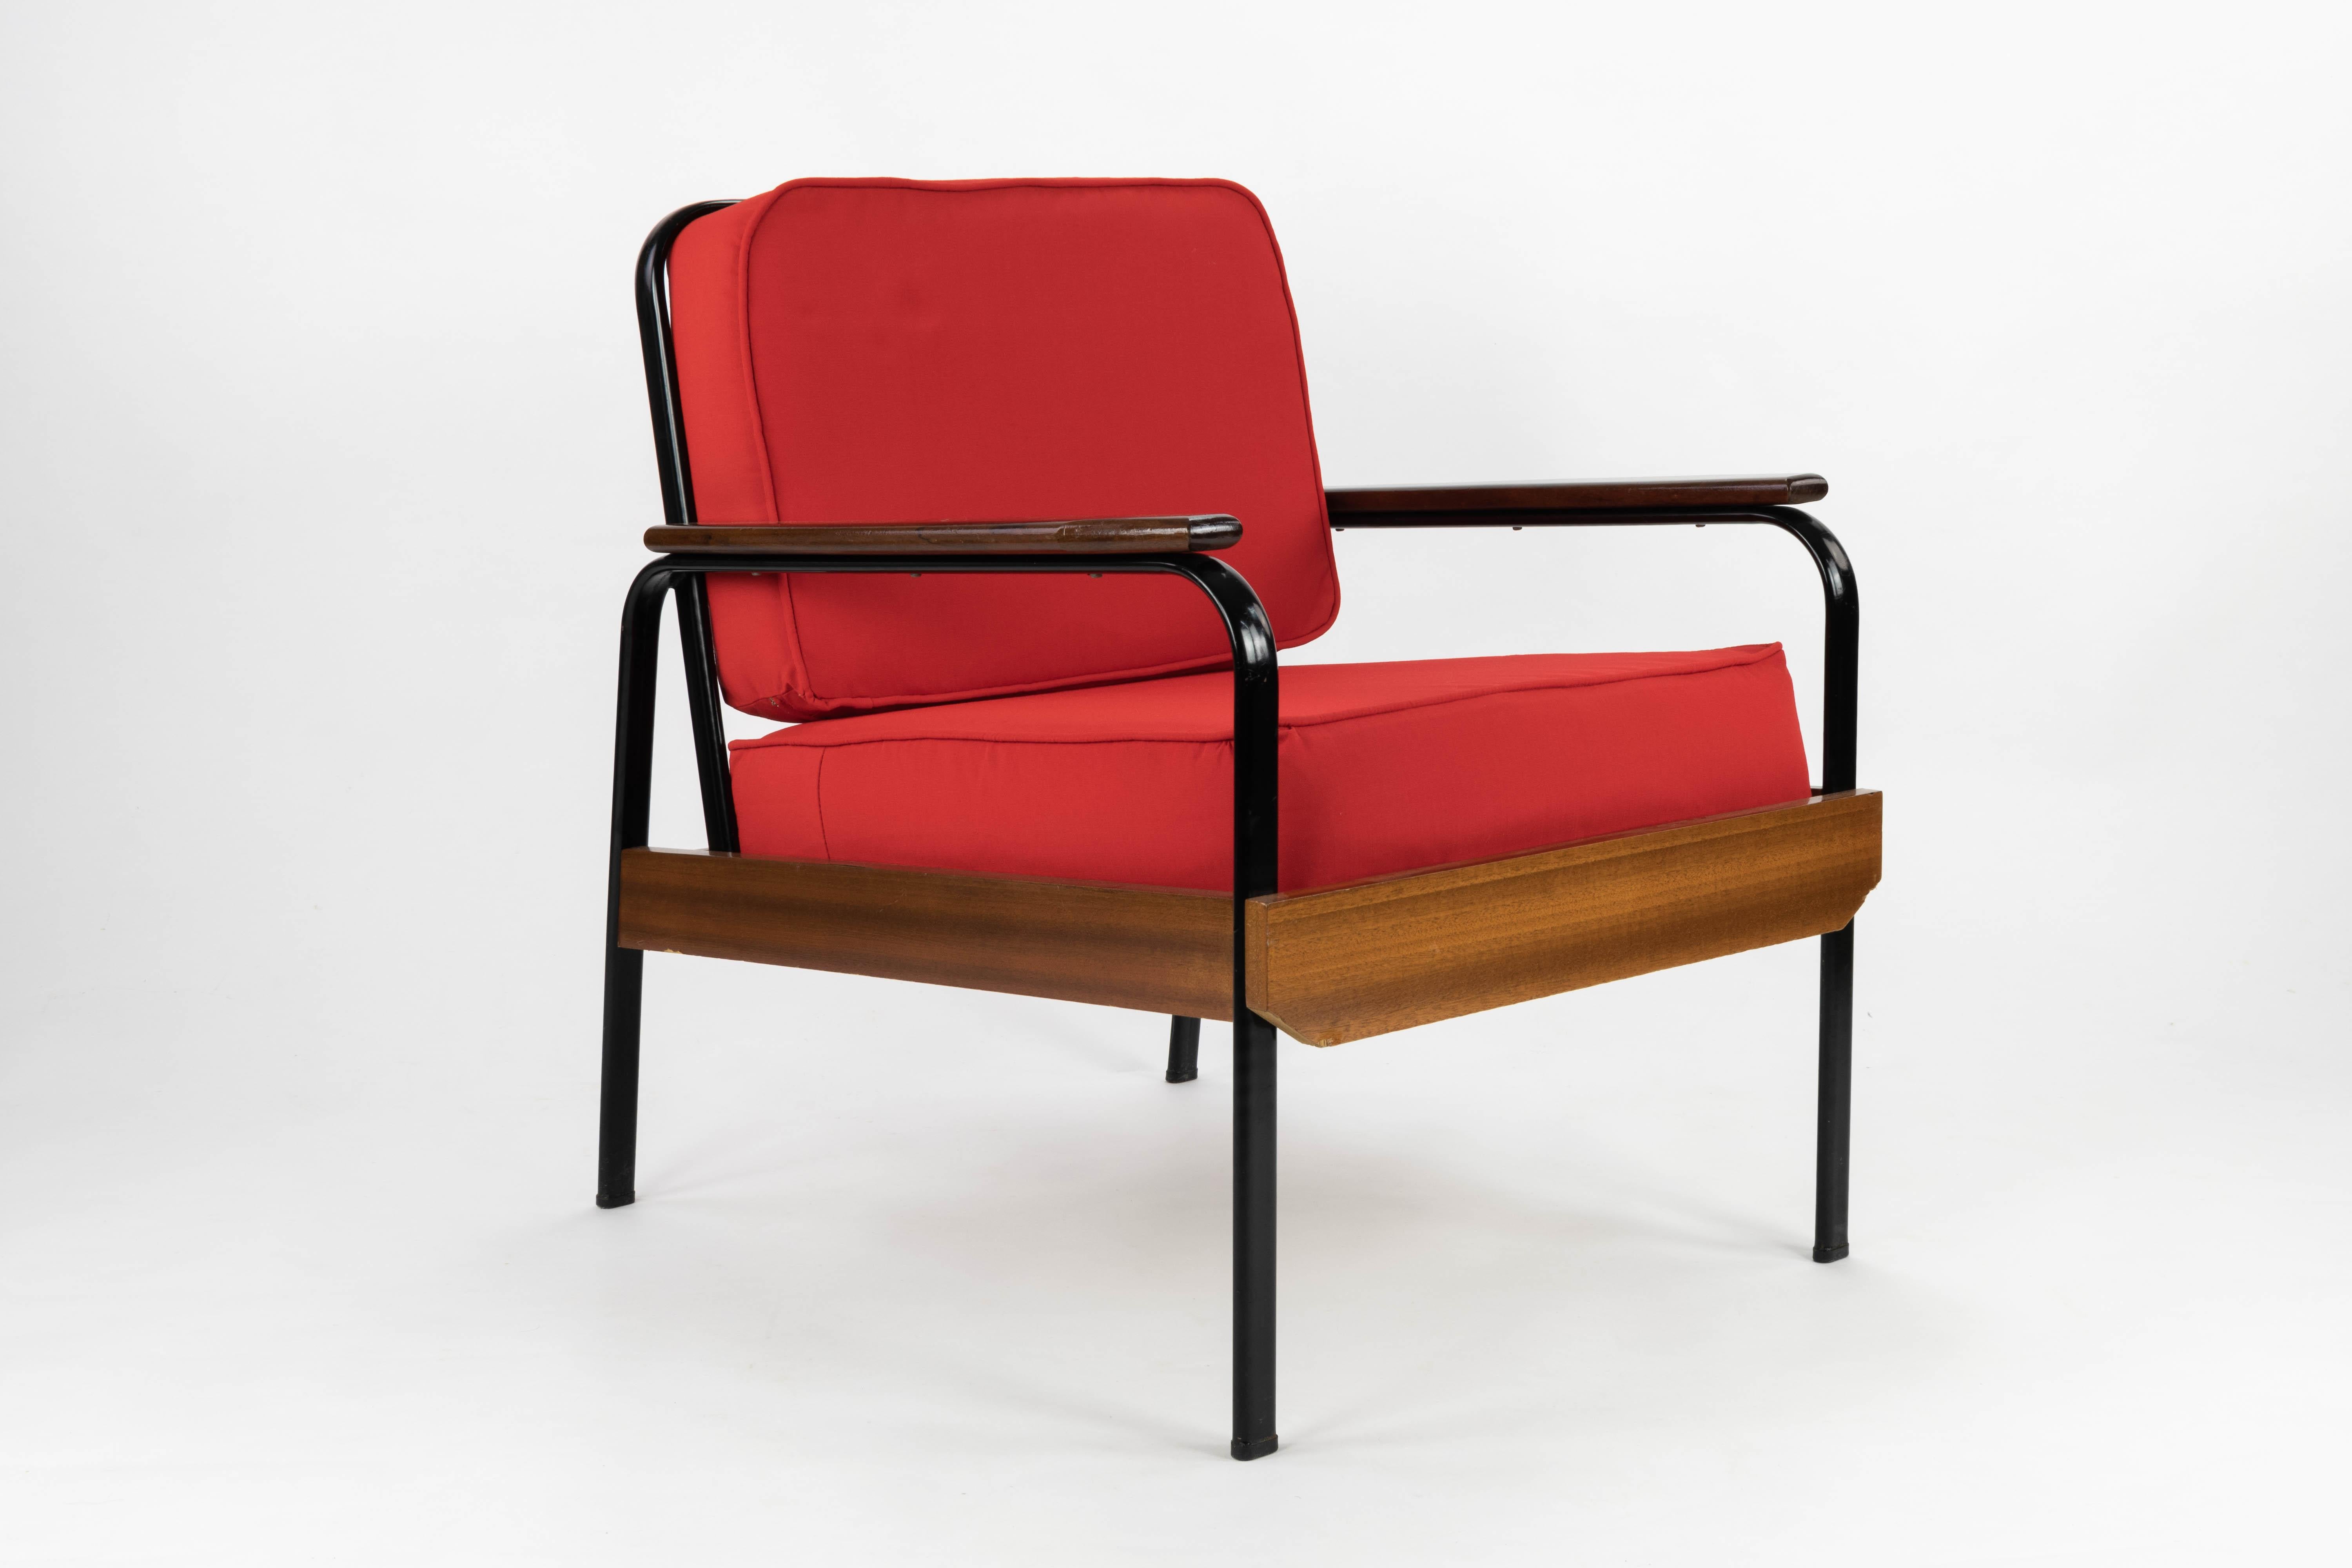 Set of sofa bed and couple of armchairs circa 1950, France. Industrial and functional model, with influence and similarity to those designed by Prouve. Iron structures lacquered in black with wood. New upholstery in red canvas.